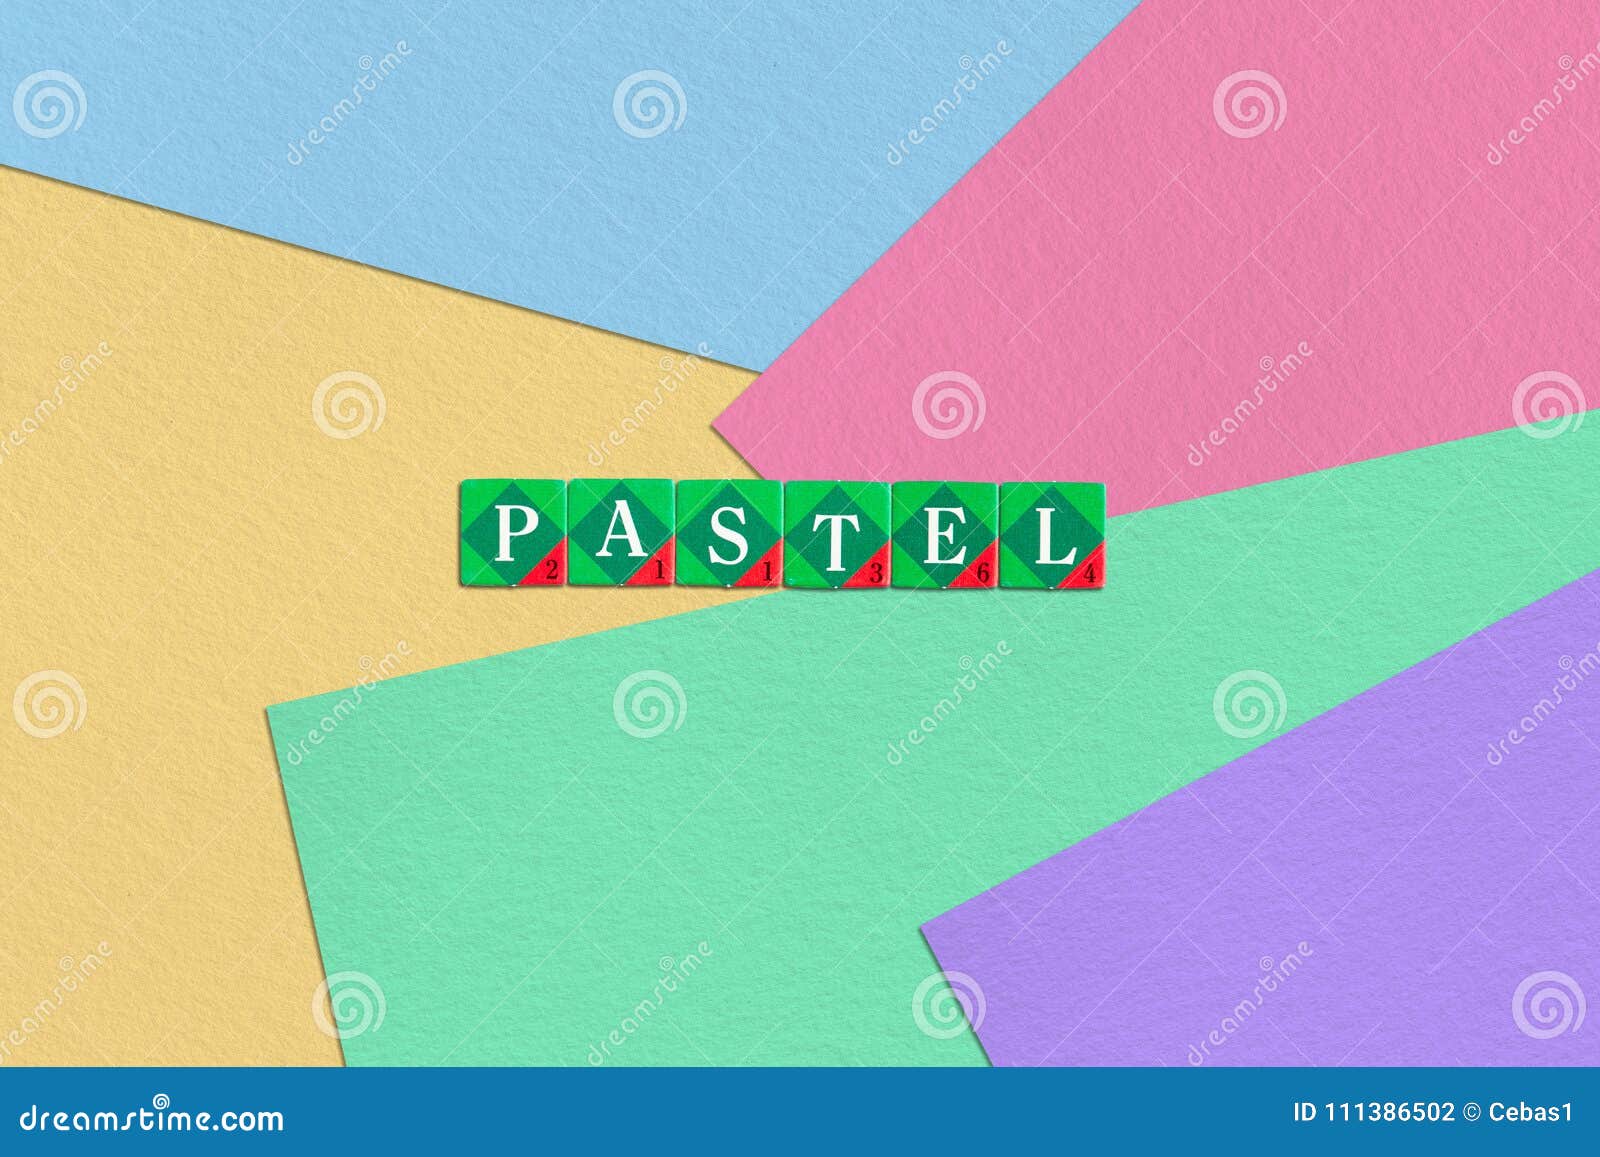 scrabble letters spelling pastel on colorful paper background